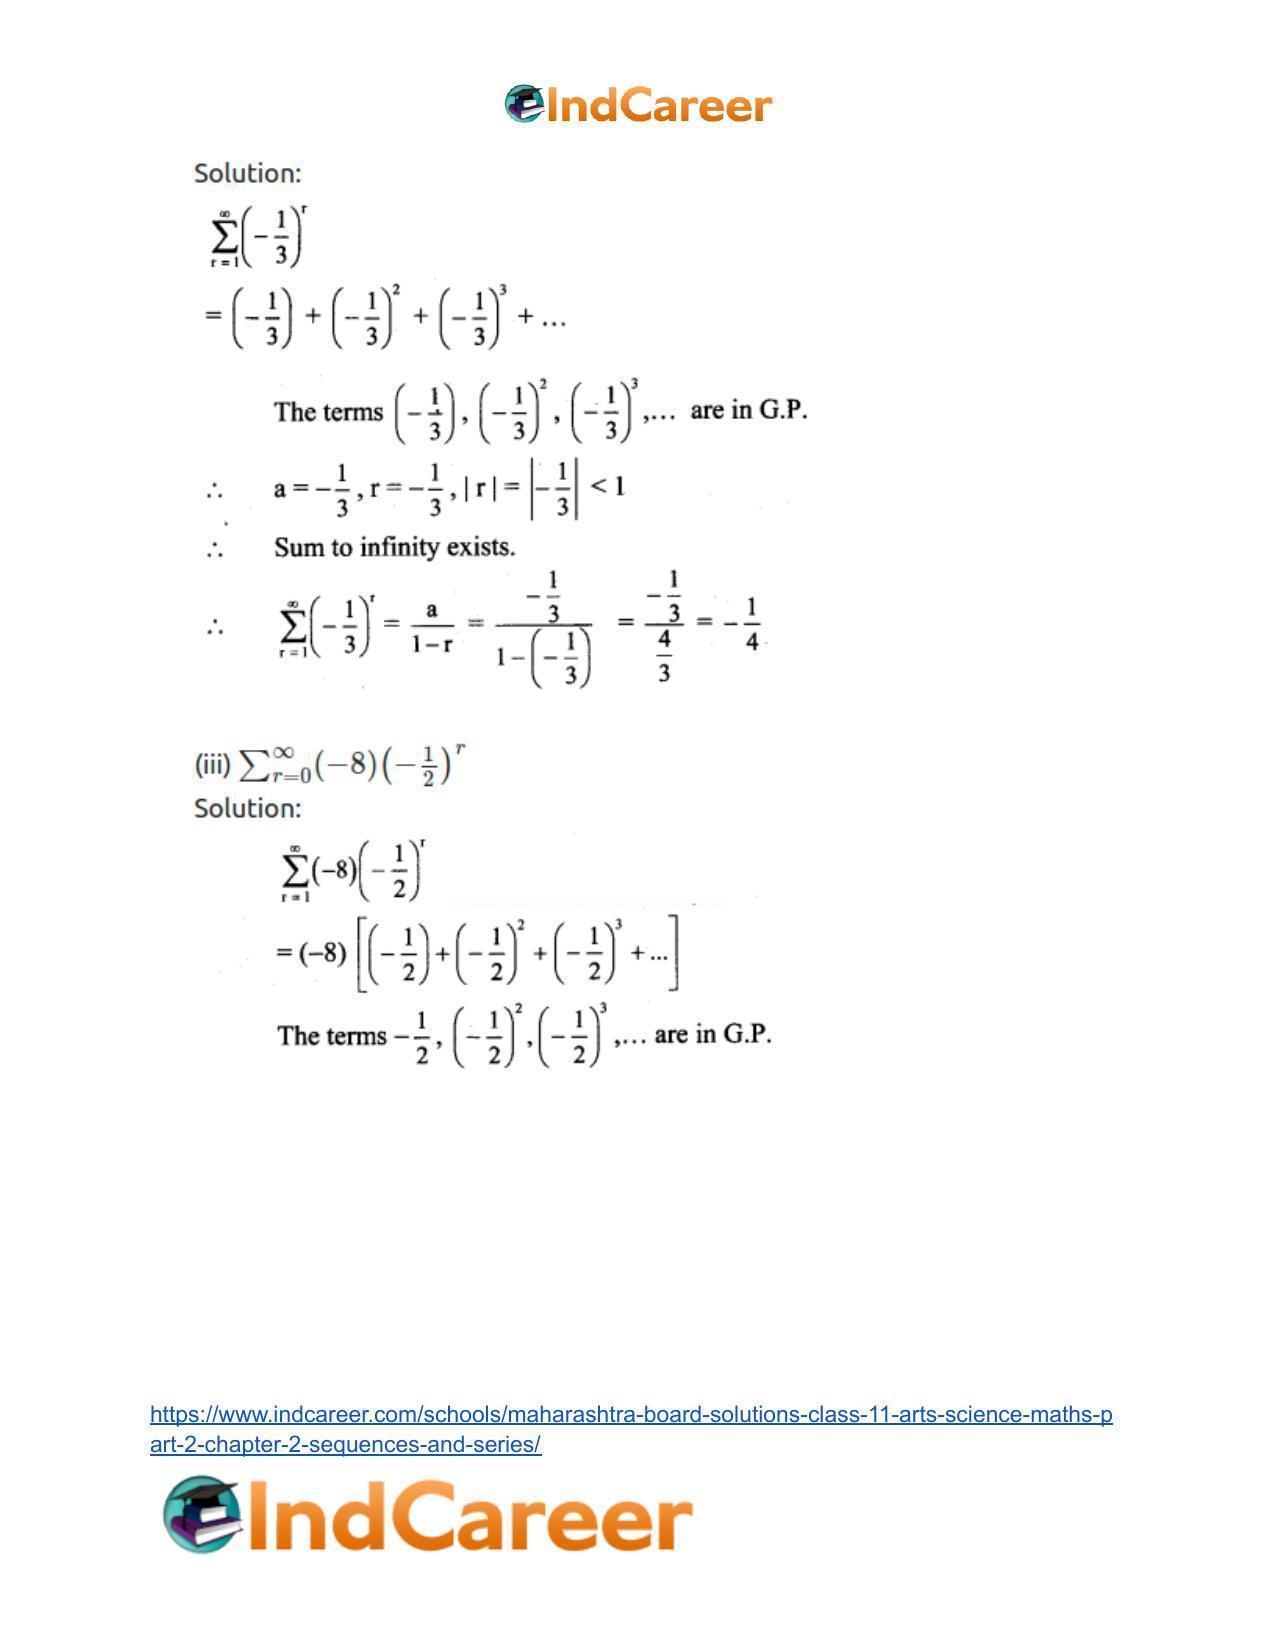 Maharashtra Board Solutions Class 11-Arts & Science Maths (Part 2): Chapter 2- Sequences and Series - Page 46